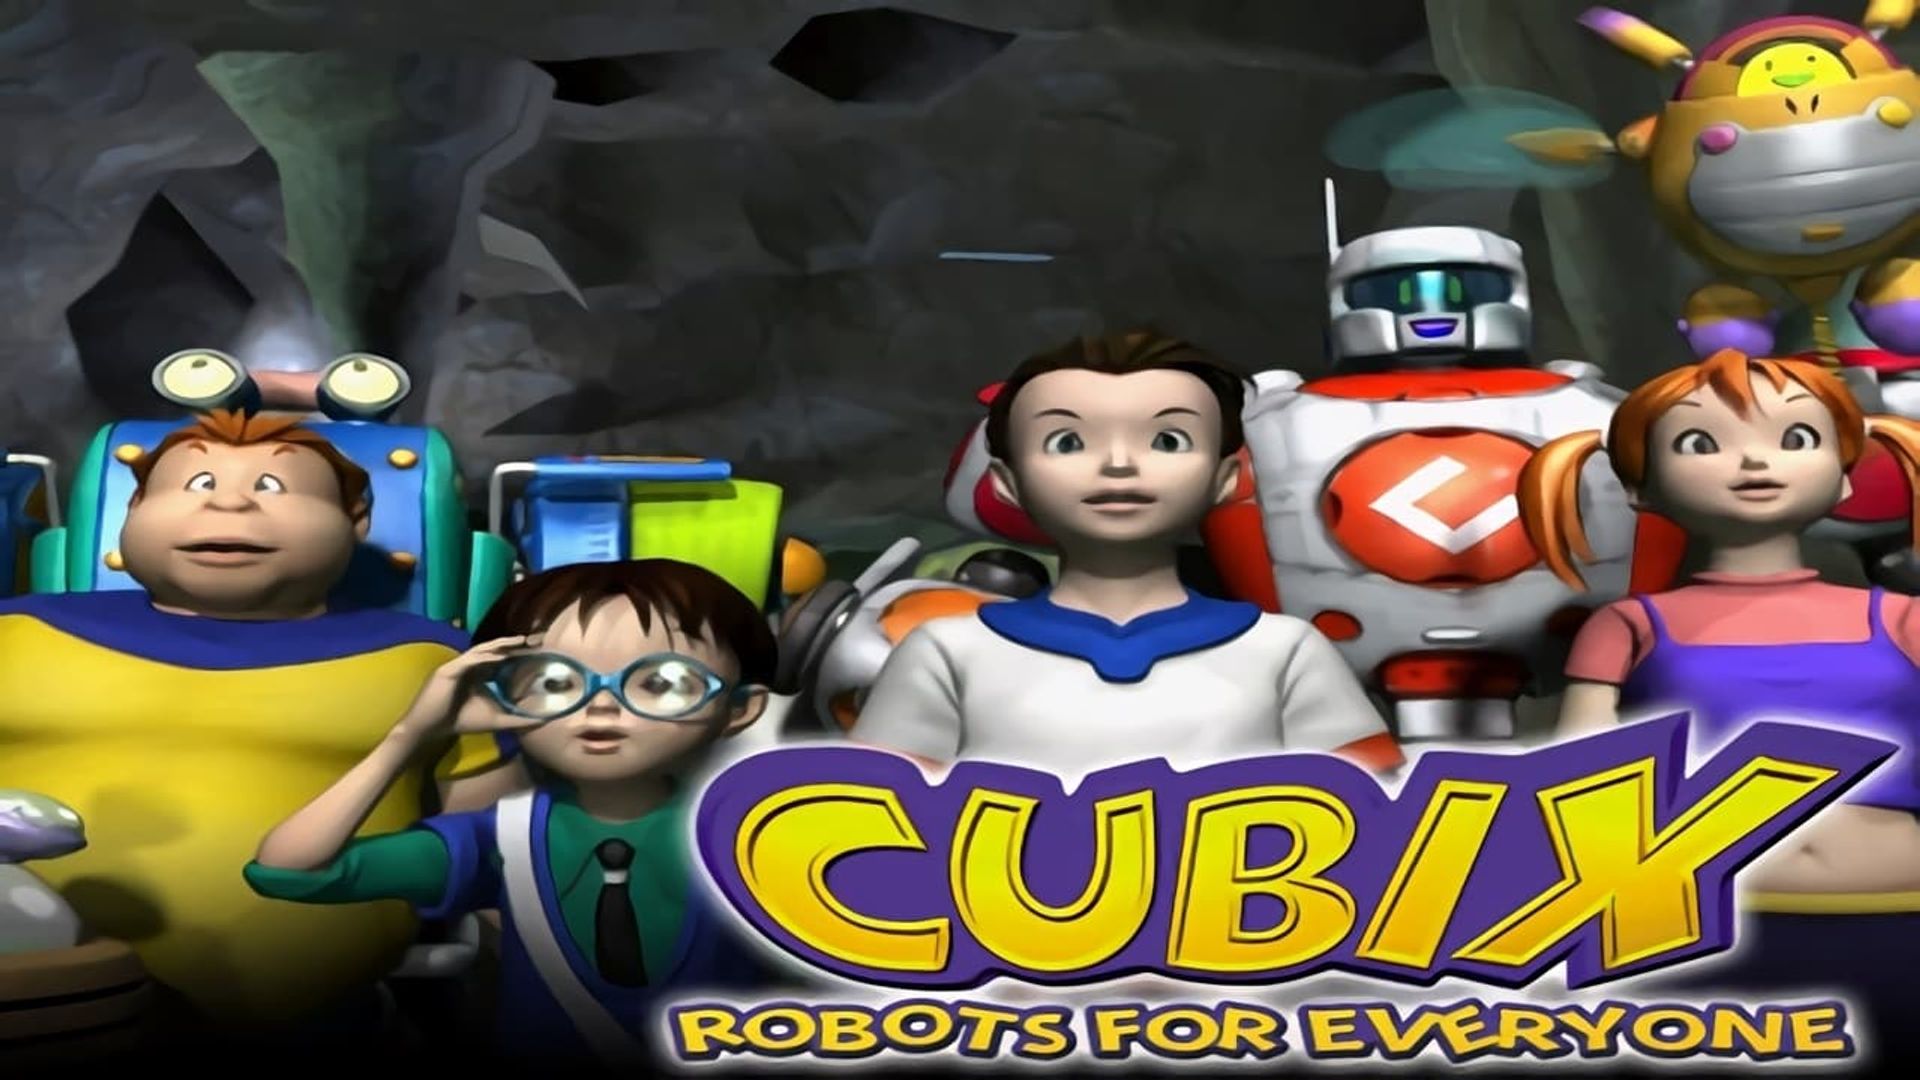 Cubix: Robots for Everyone background